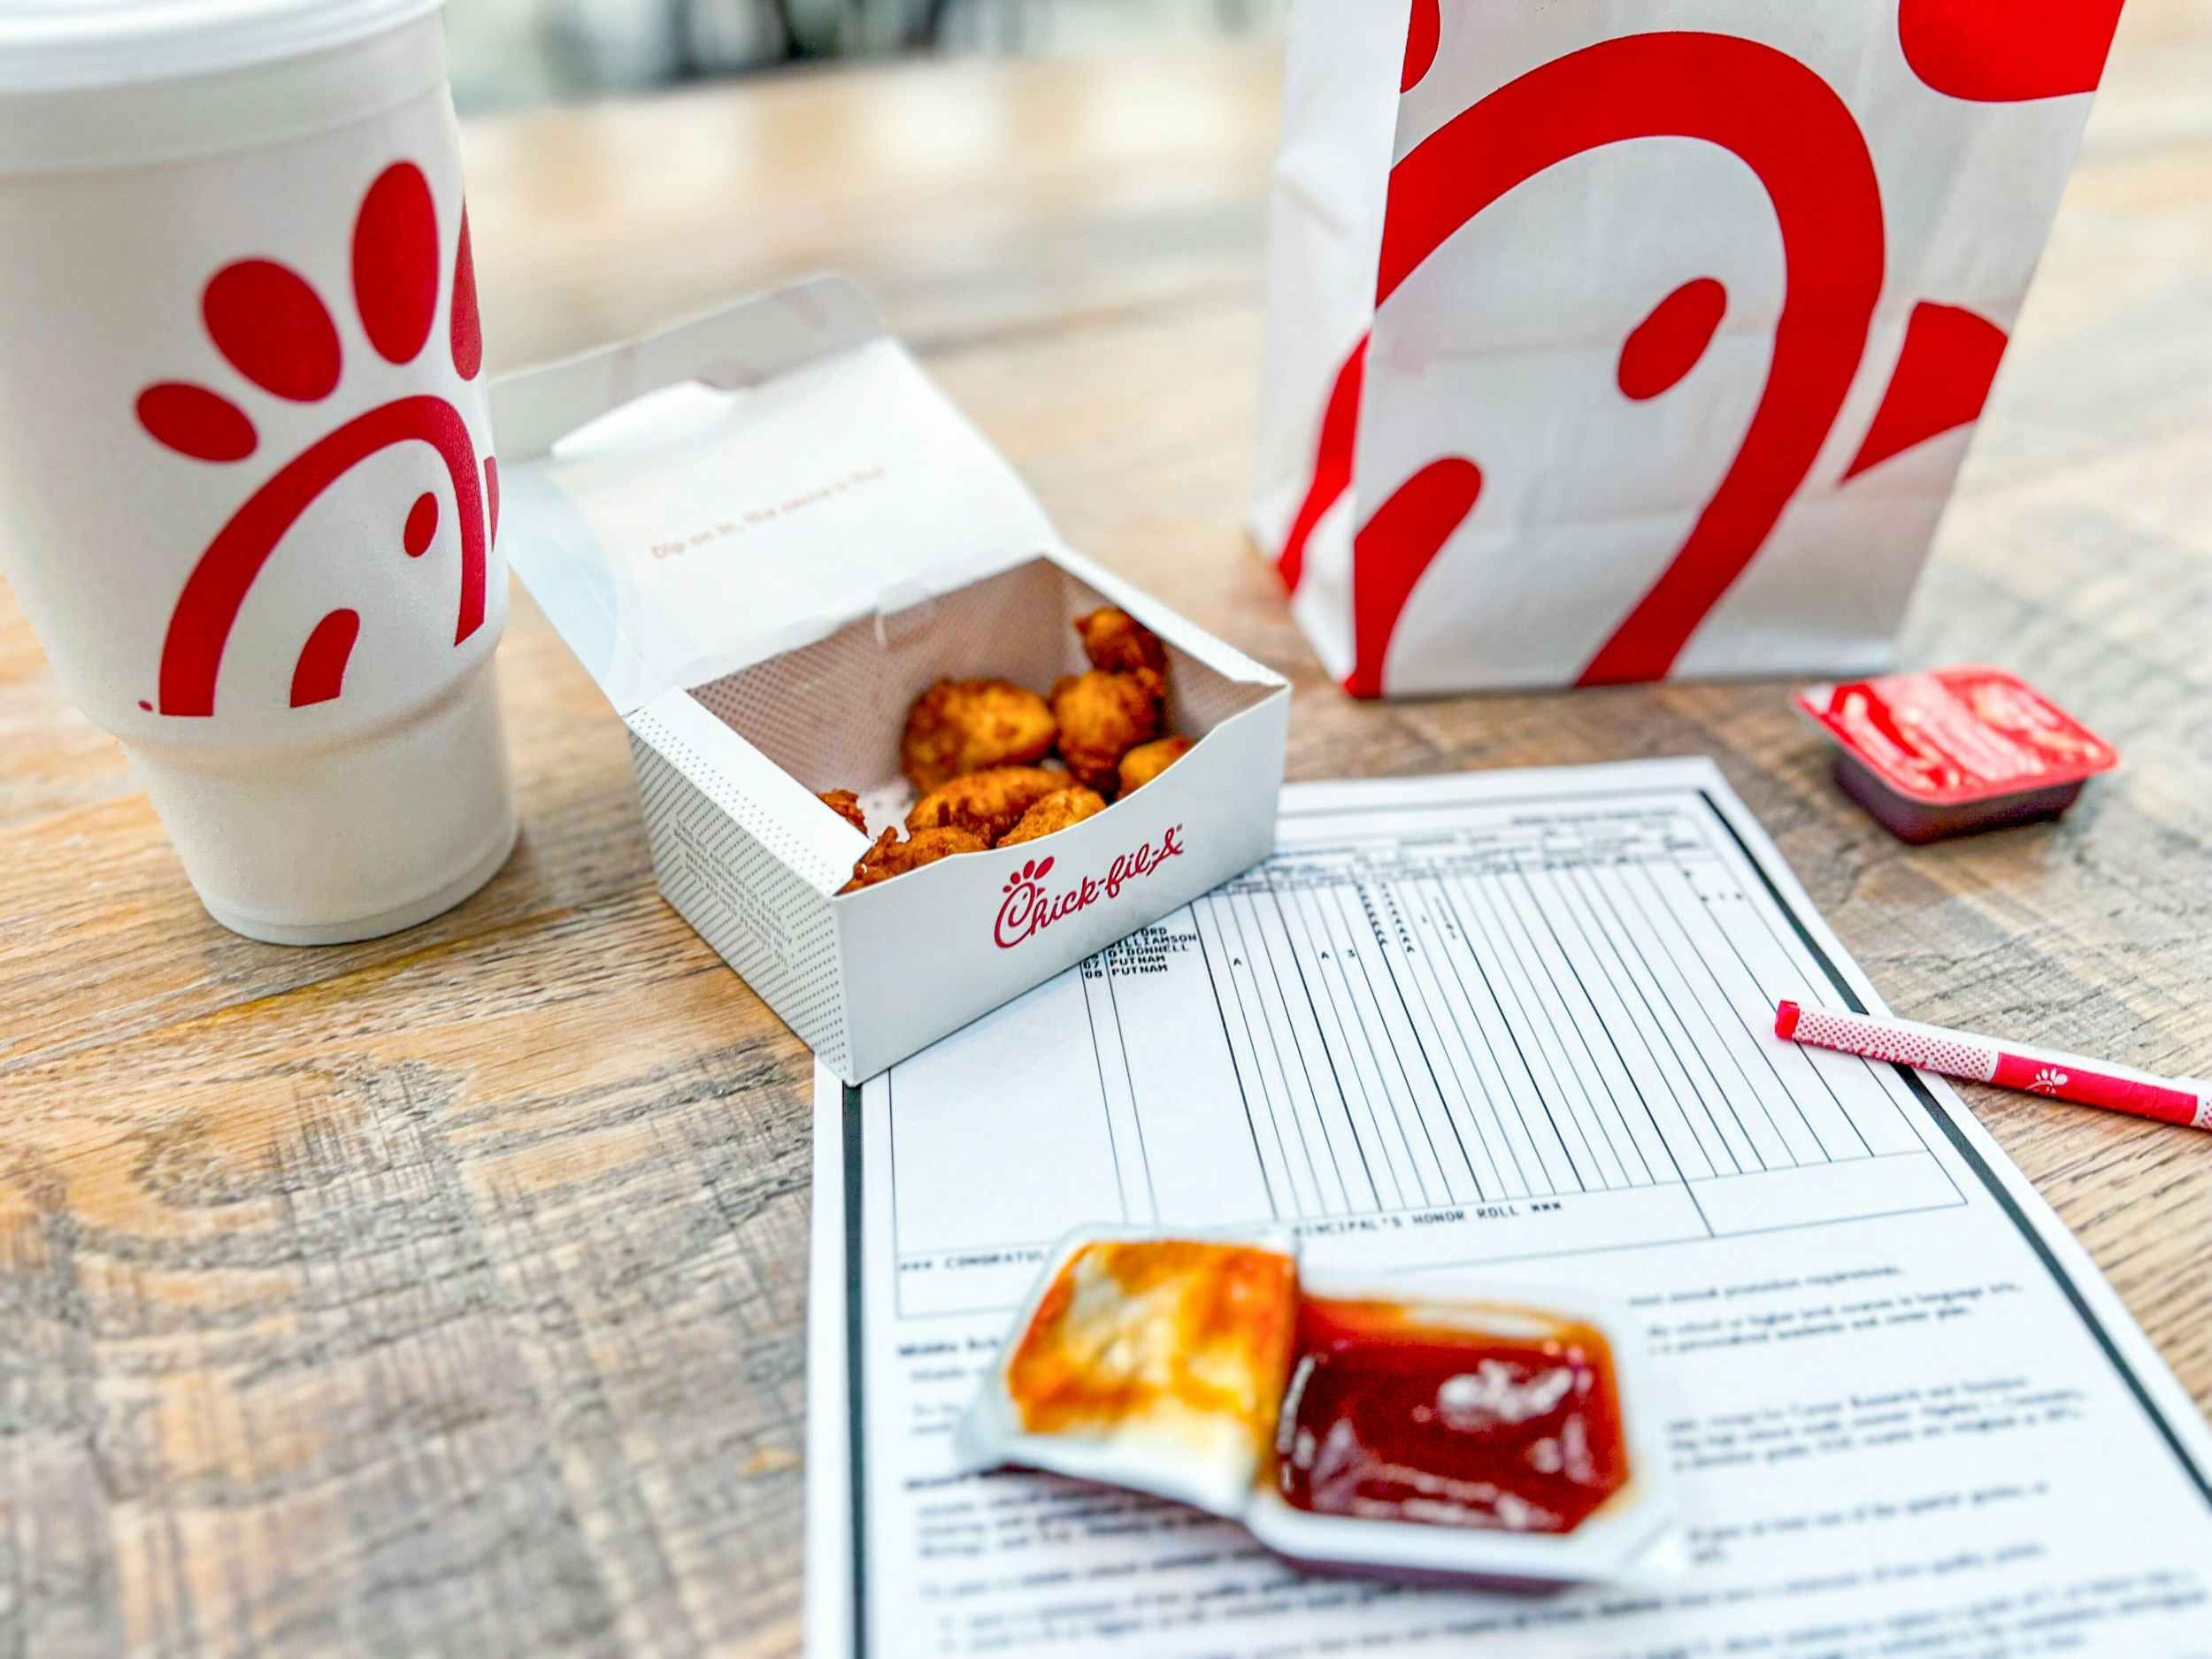 chick fil a nuggets next to a child's report card